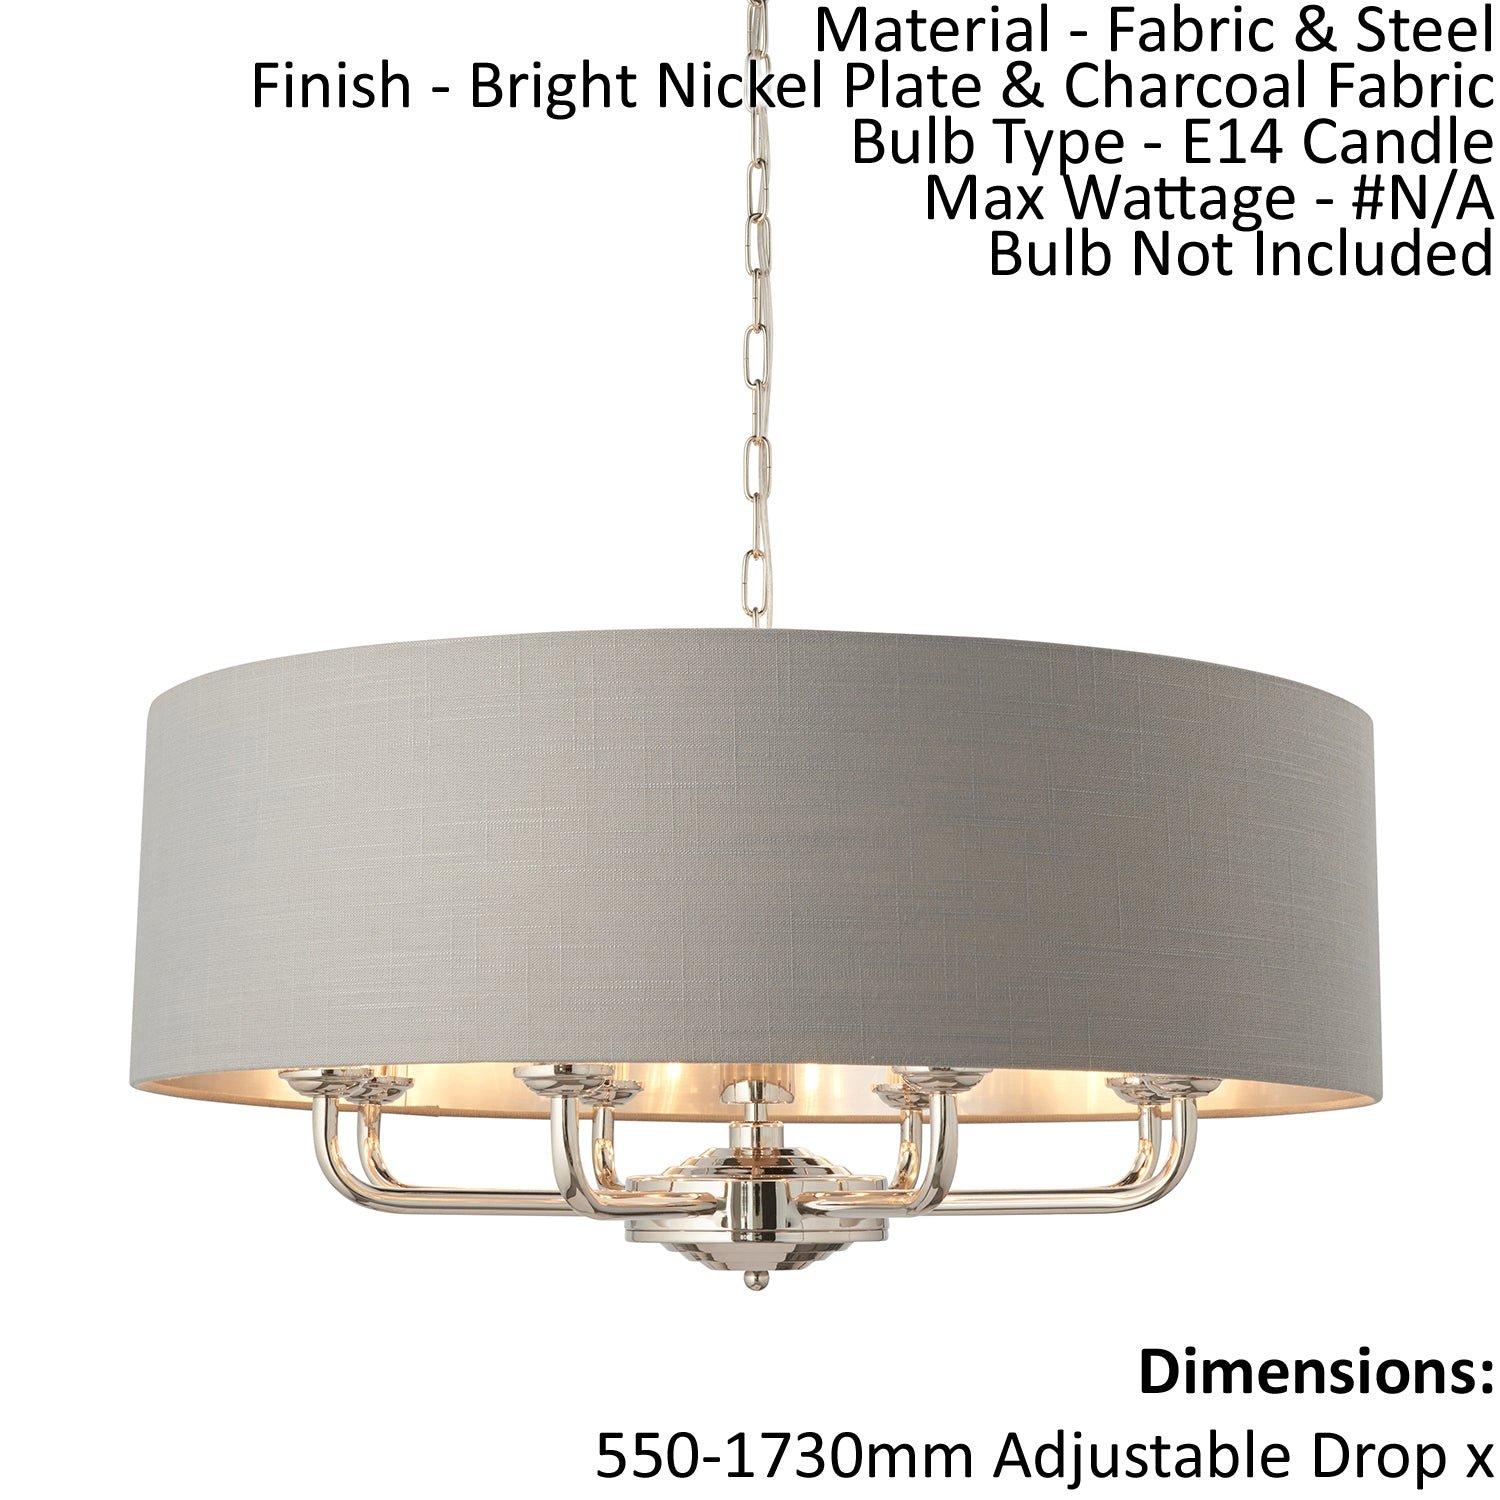 Ceiling Pendant Light - Bright Nickel Plate & Charcoal Fabric - 8 x 40W E14